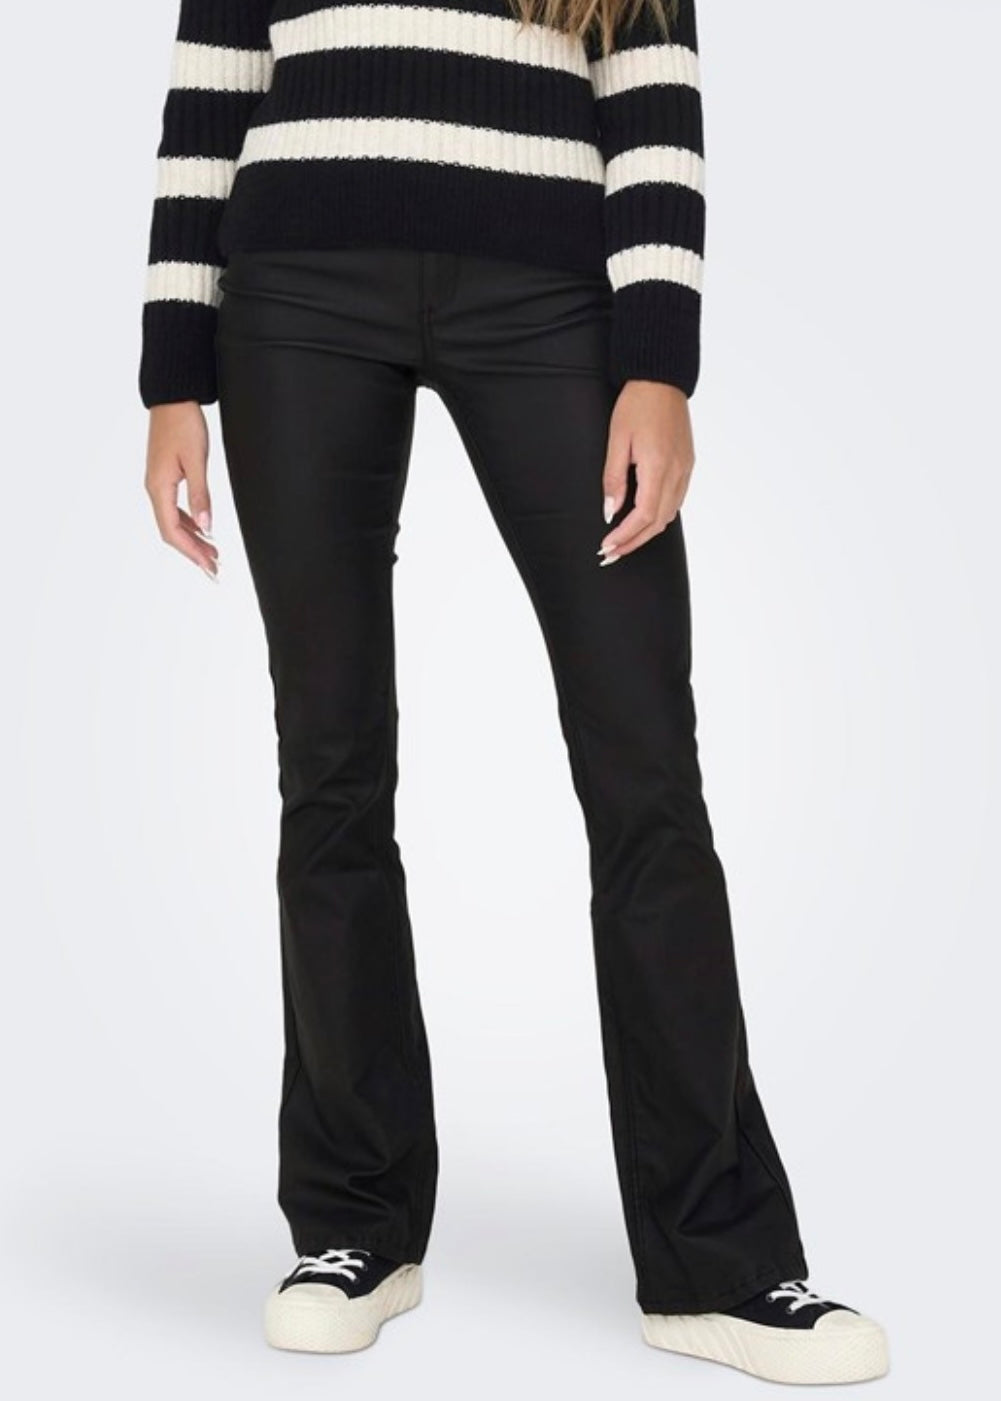 ONLY - BLUSH LIFE MID FLARED COATED PANT - BLACK